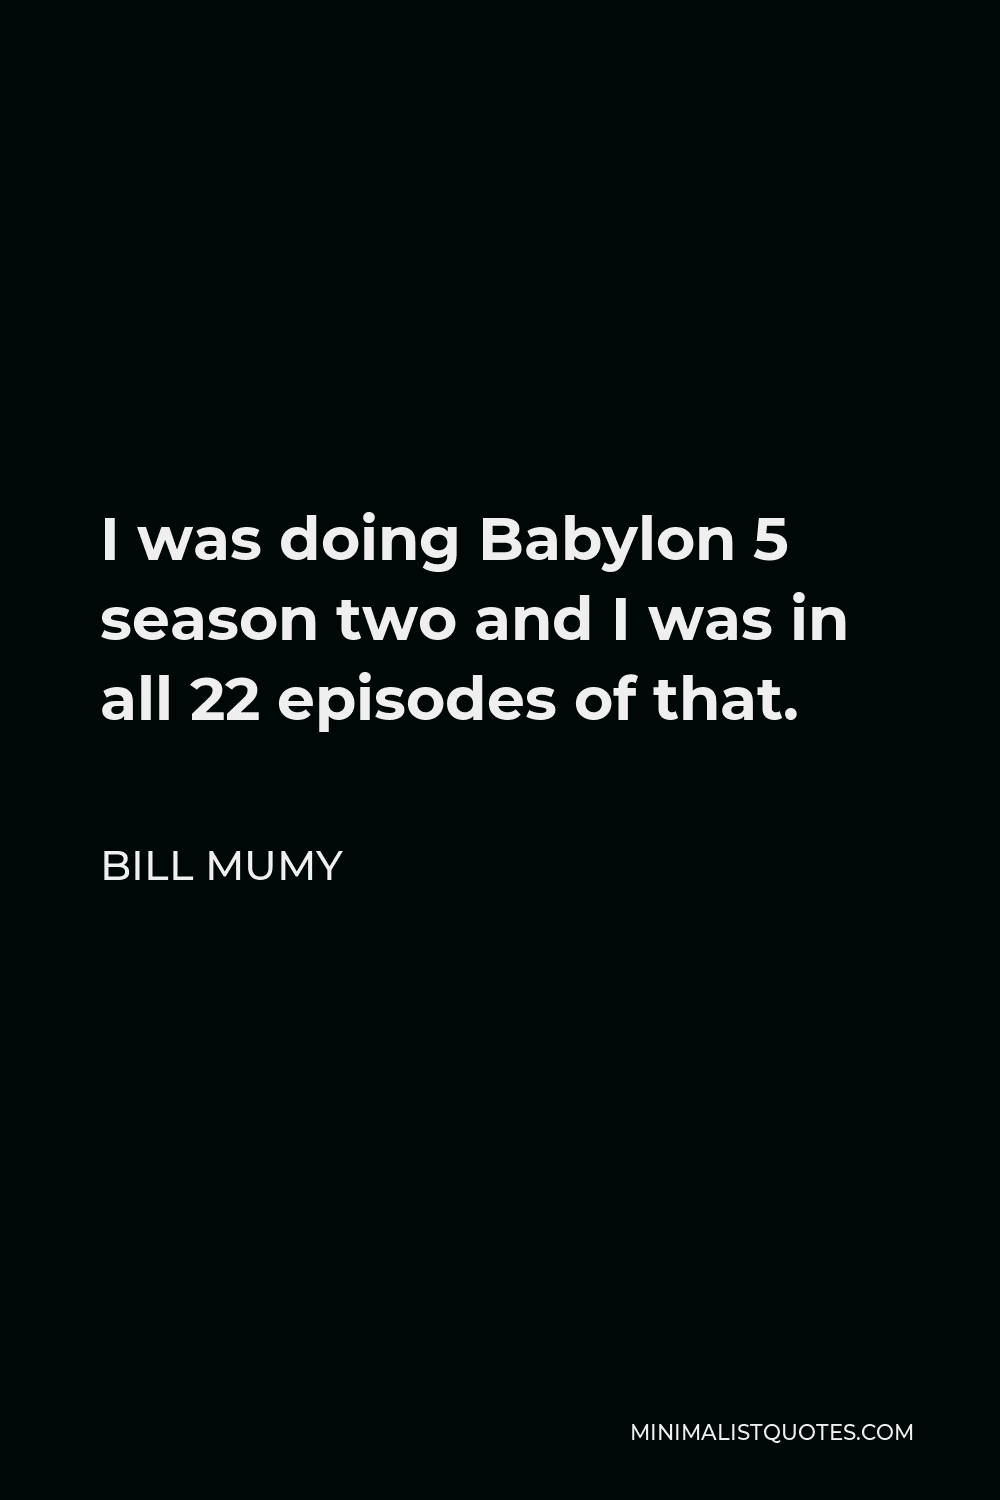 Bill Mumy Quote - I was doing Babylon 5 season two and I was in all 22 episodes of that.